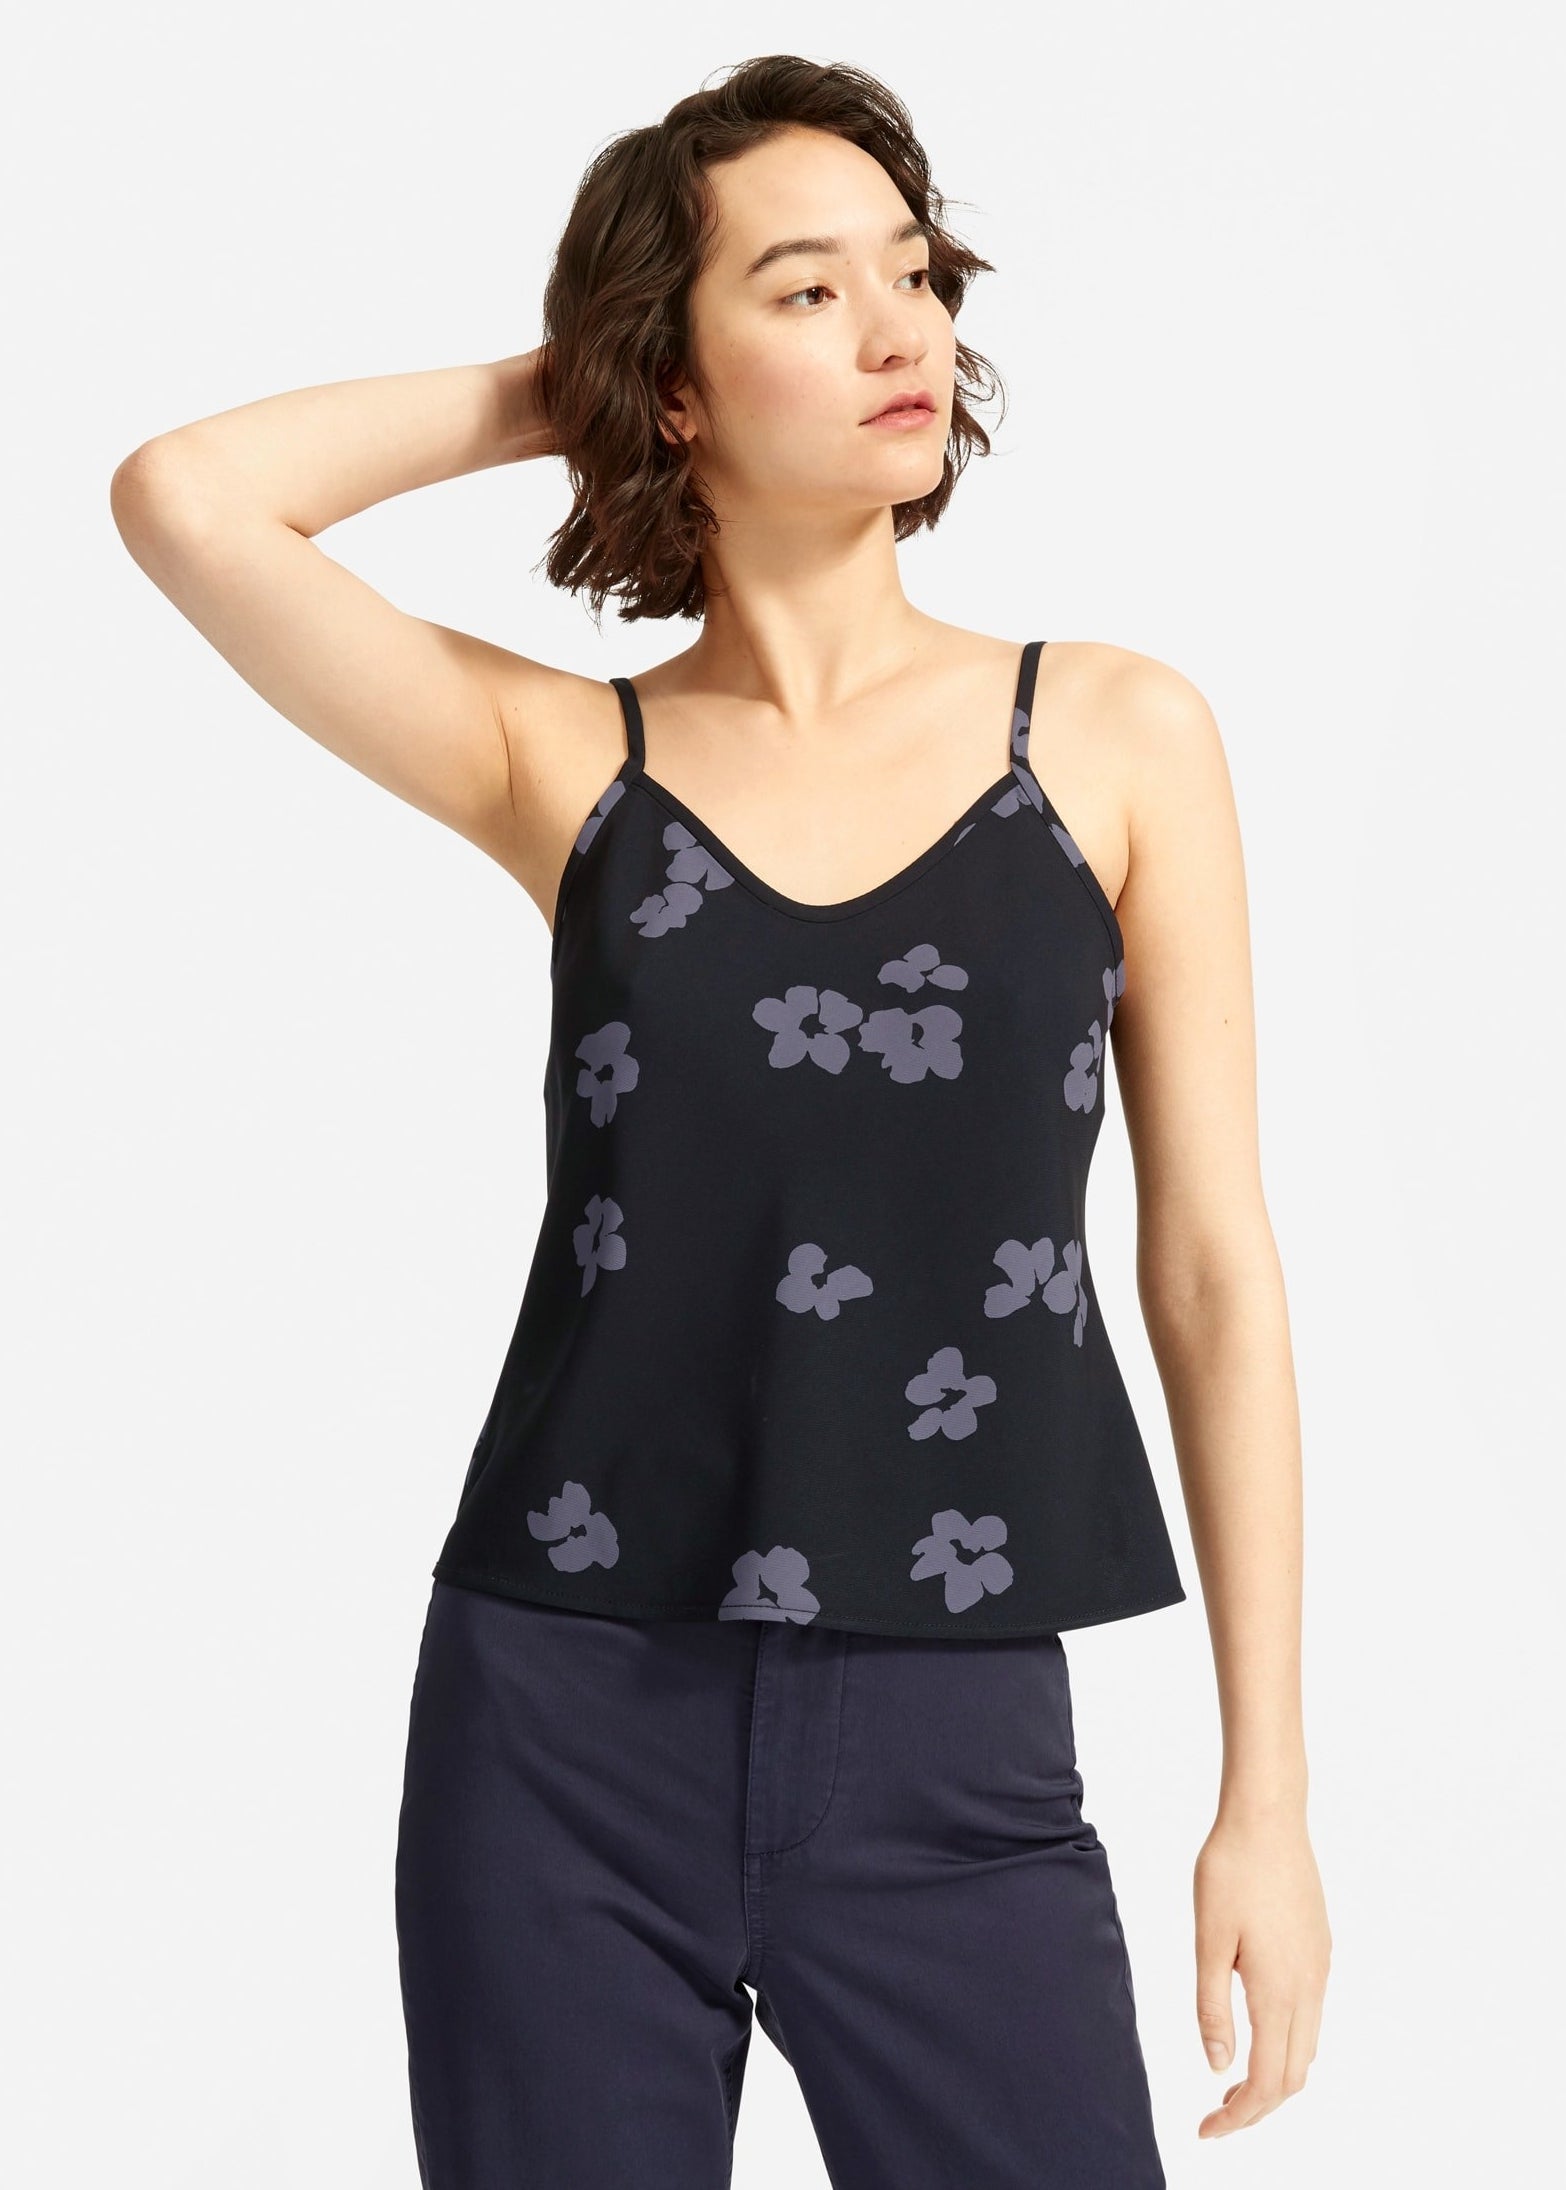 model in black cami with grey artistic flower print